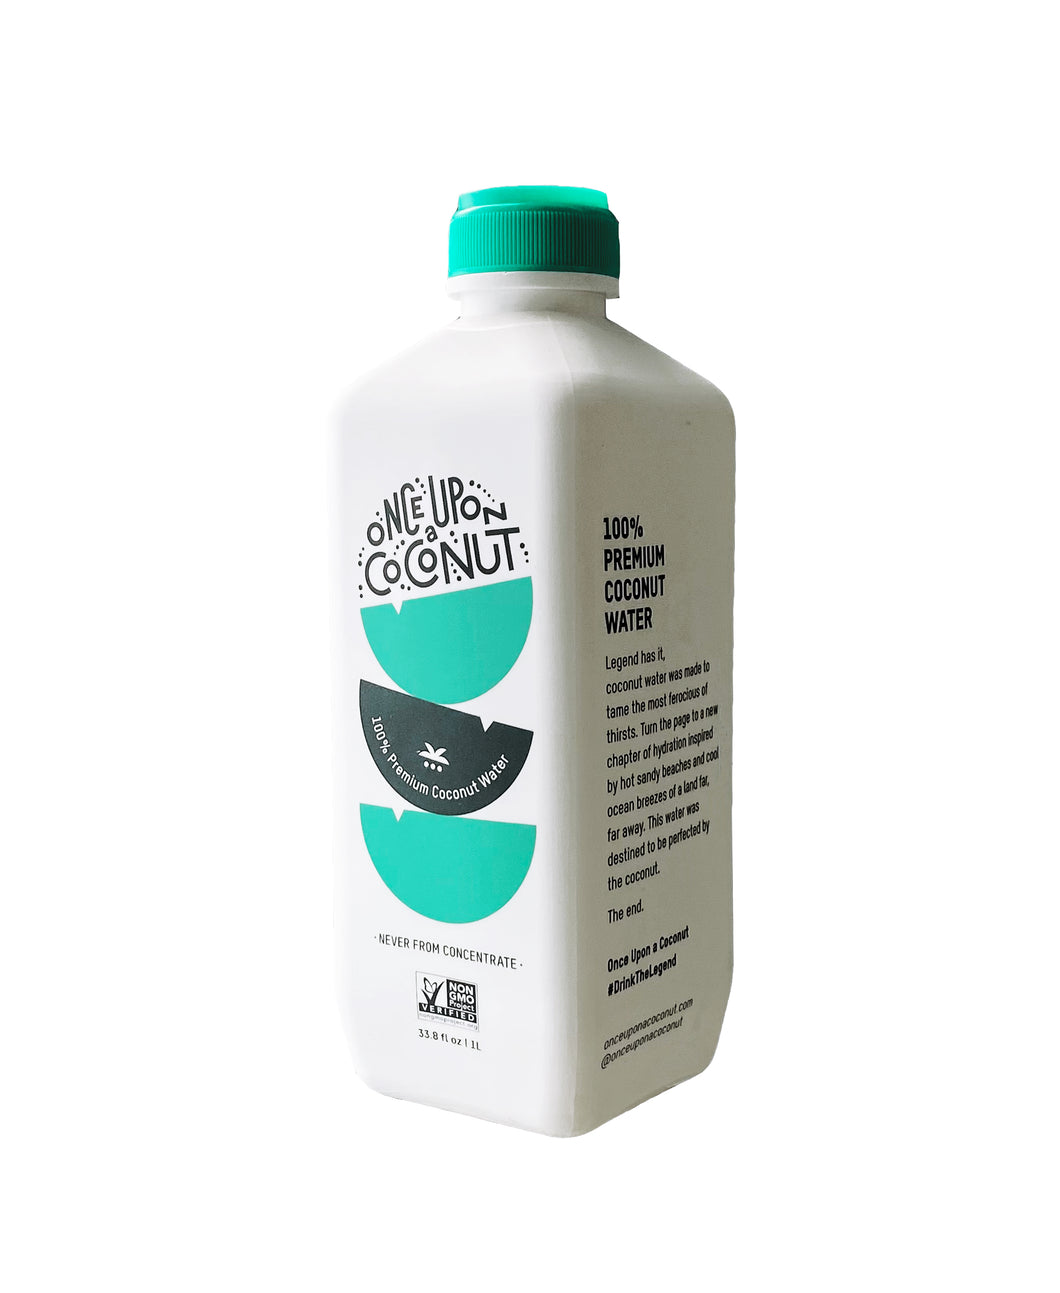 Once Upon a Coconut 100% Pure Coconut Water, 1 Liter (Pack of 12)